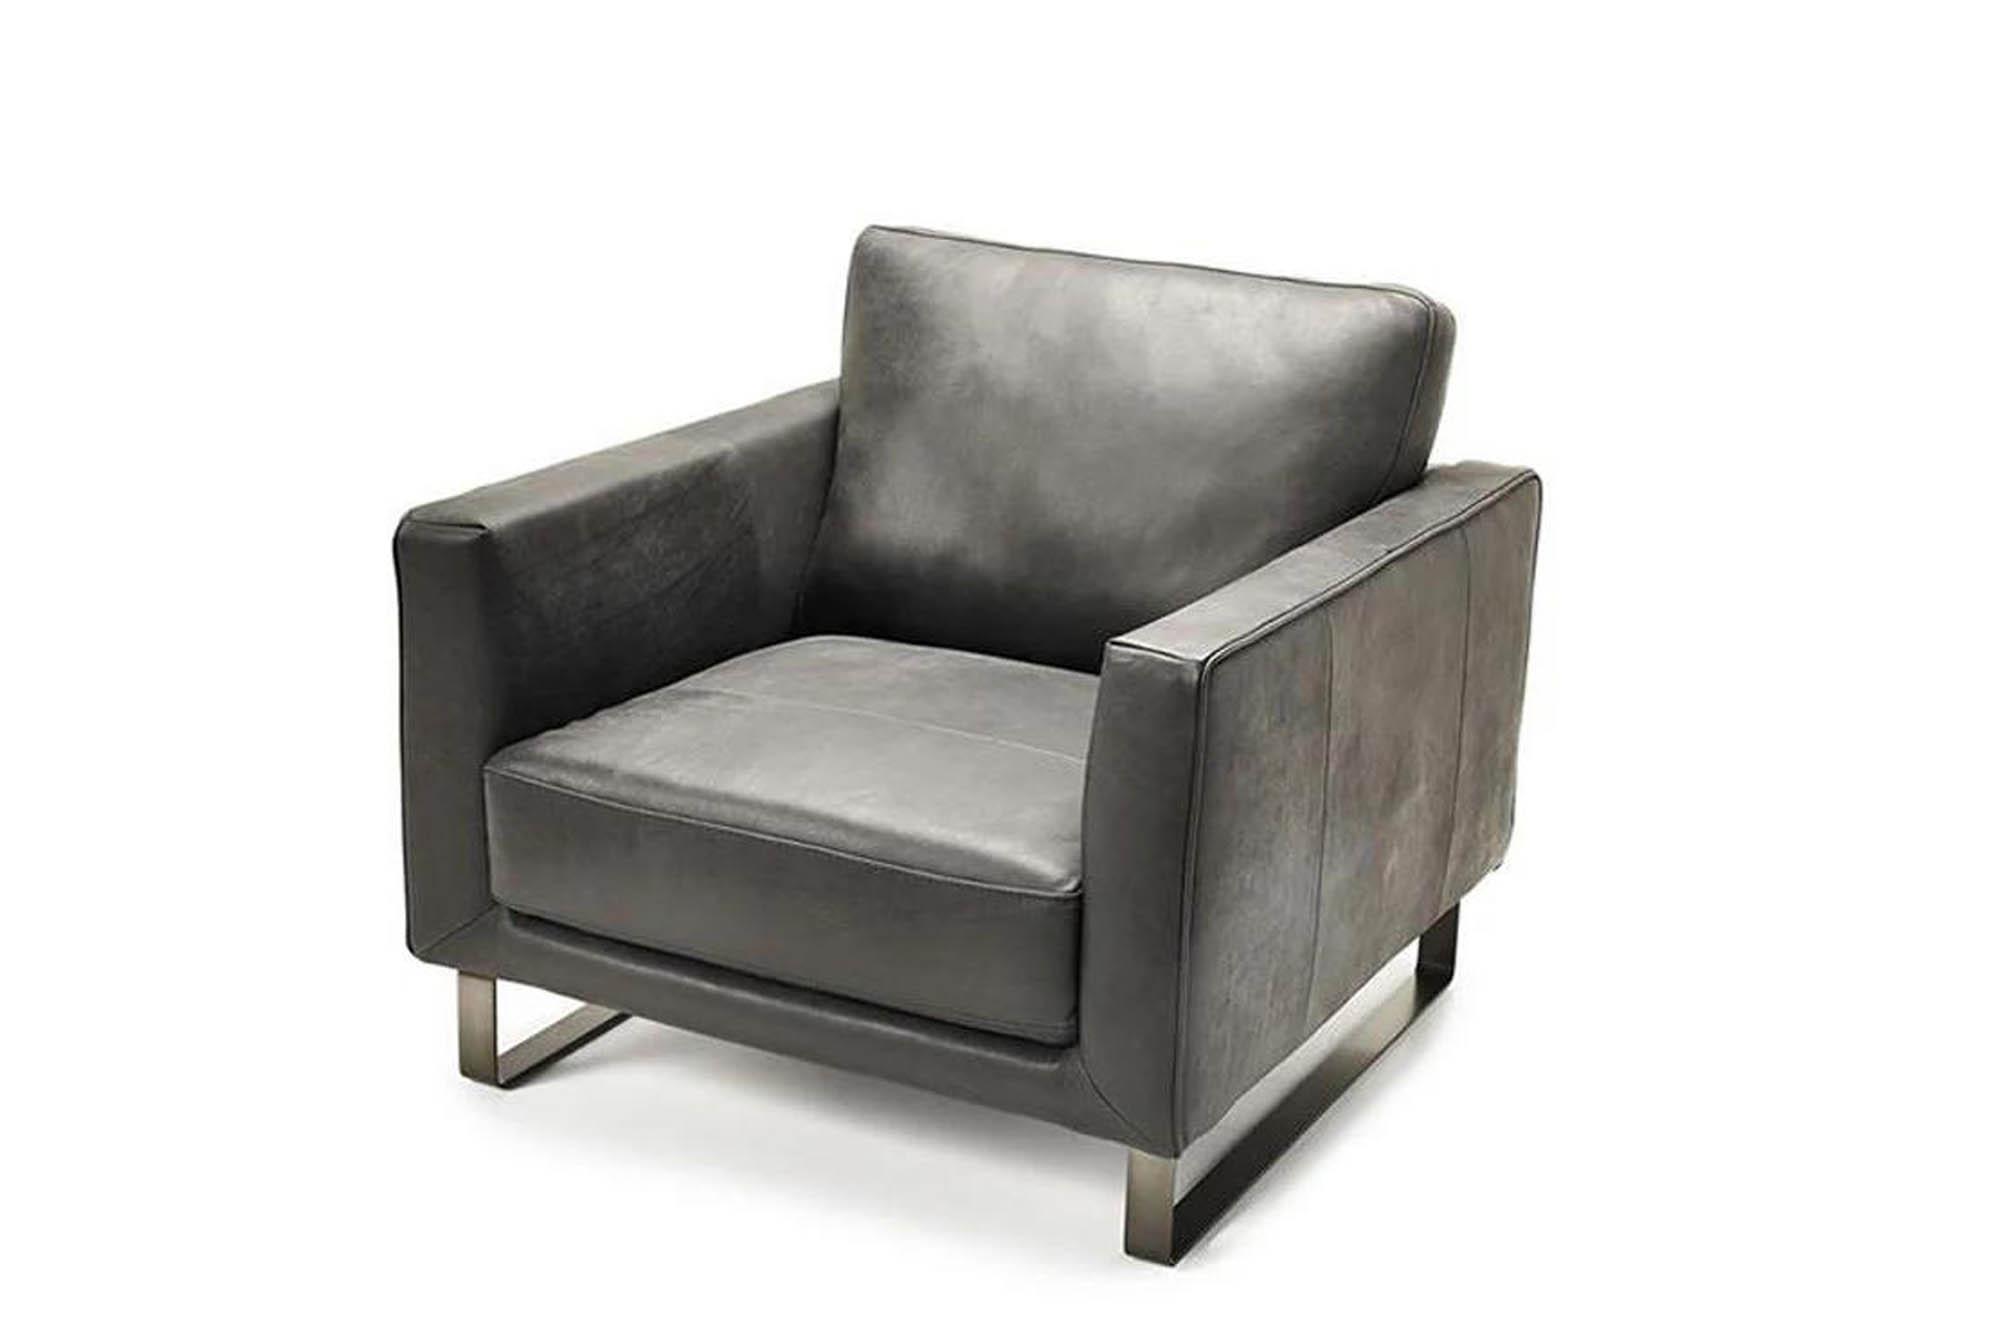 Contemporary Arm Chair FM90000GY-CH-PK FM90000GY-CH-PK in Gray Italian Leather